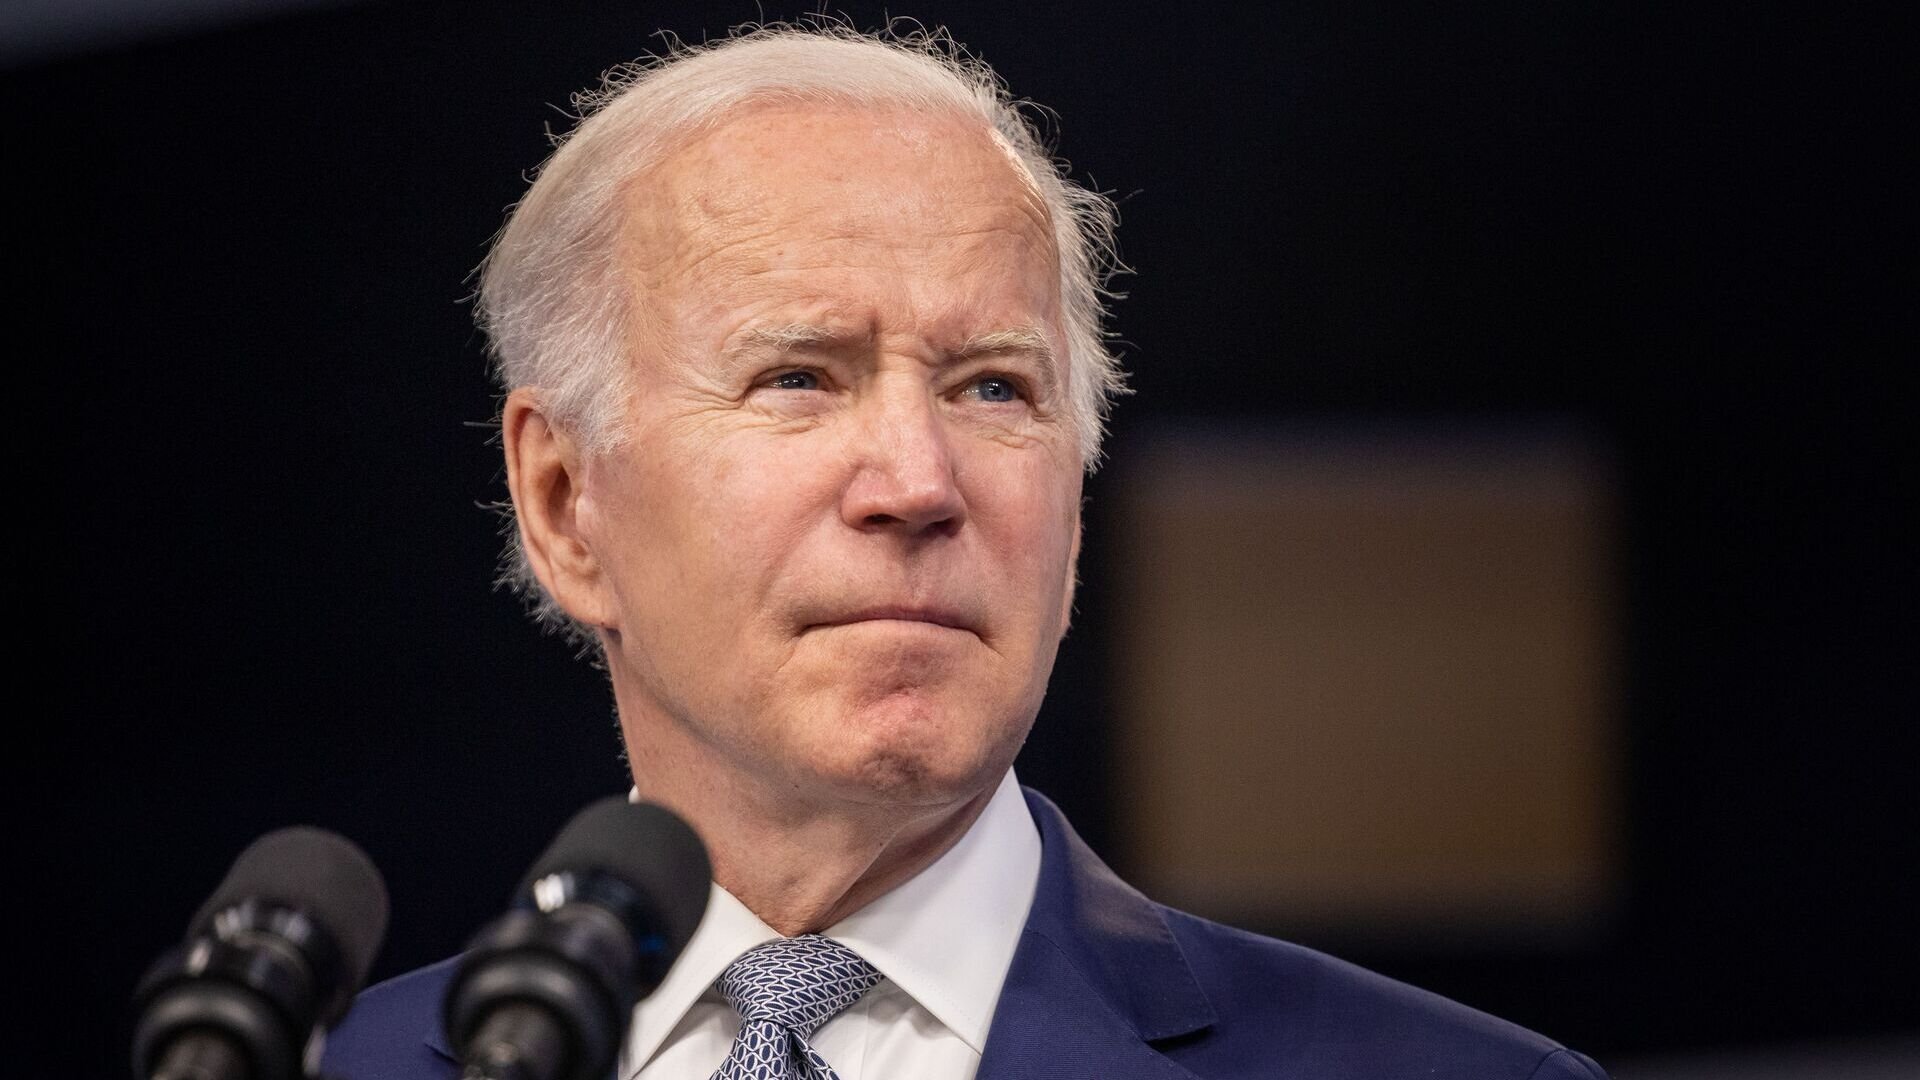 Biden Administration Will Cancel Student Debt of 200,000 Borrowers Defrauded by Colleges